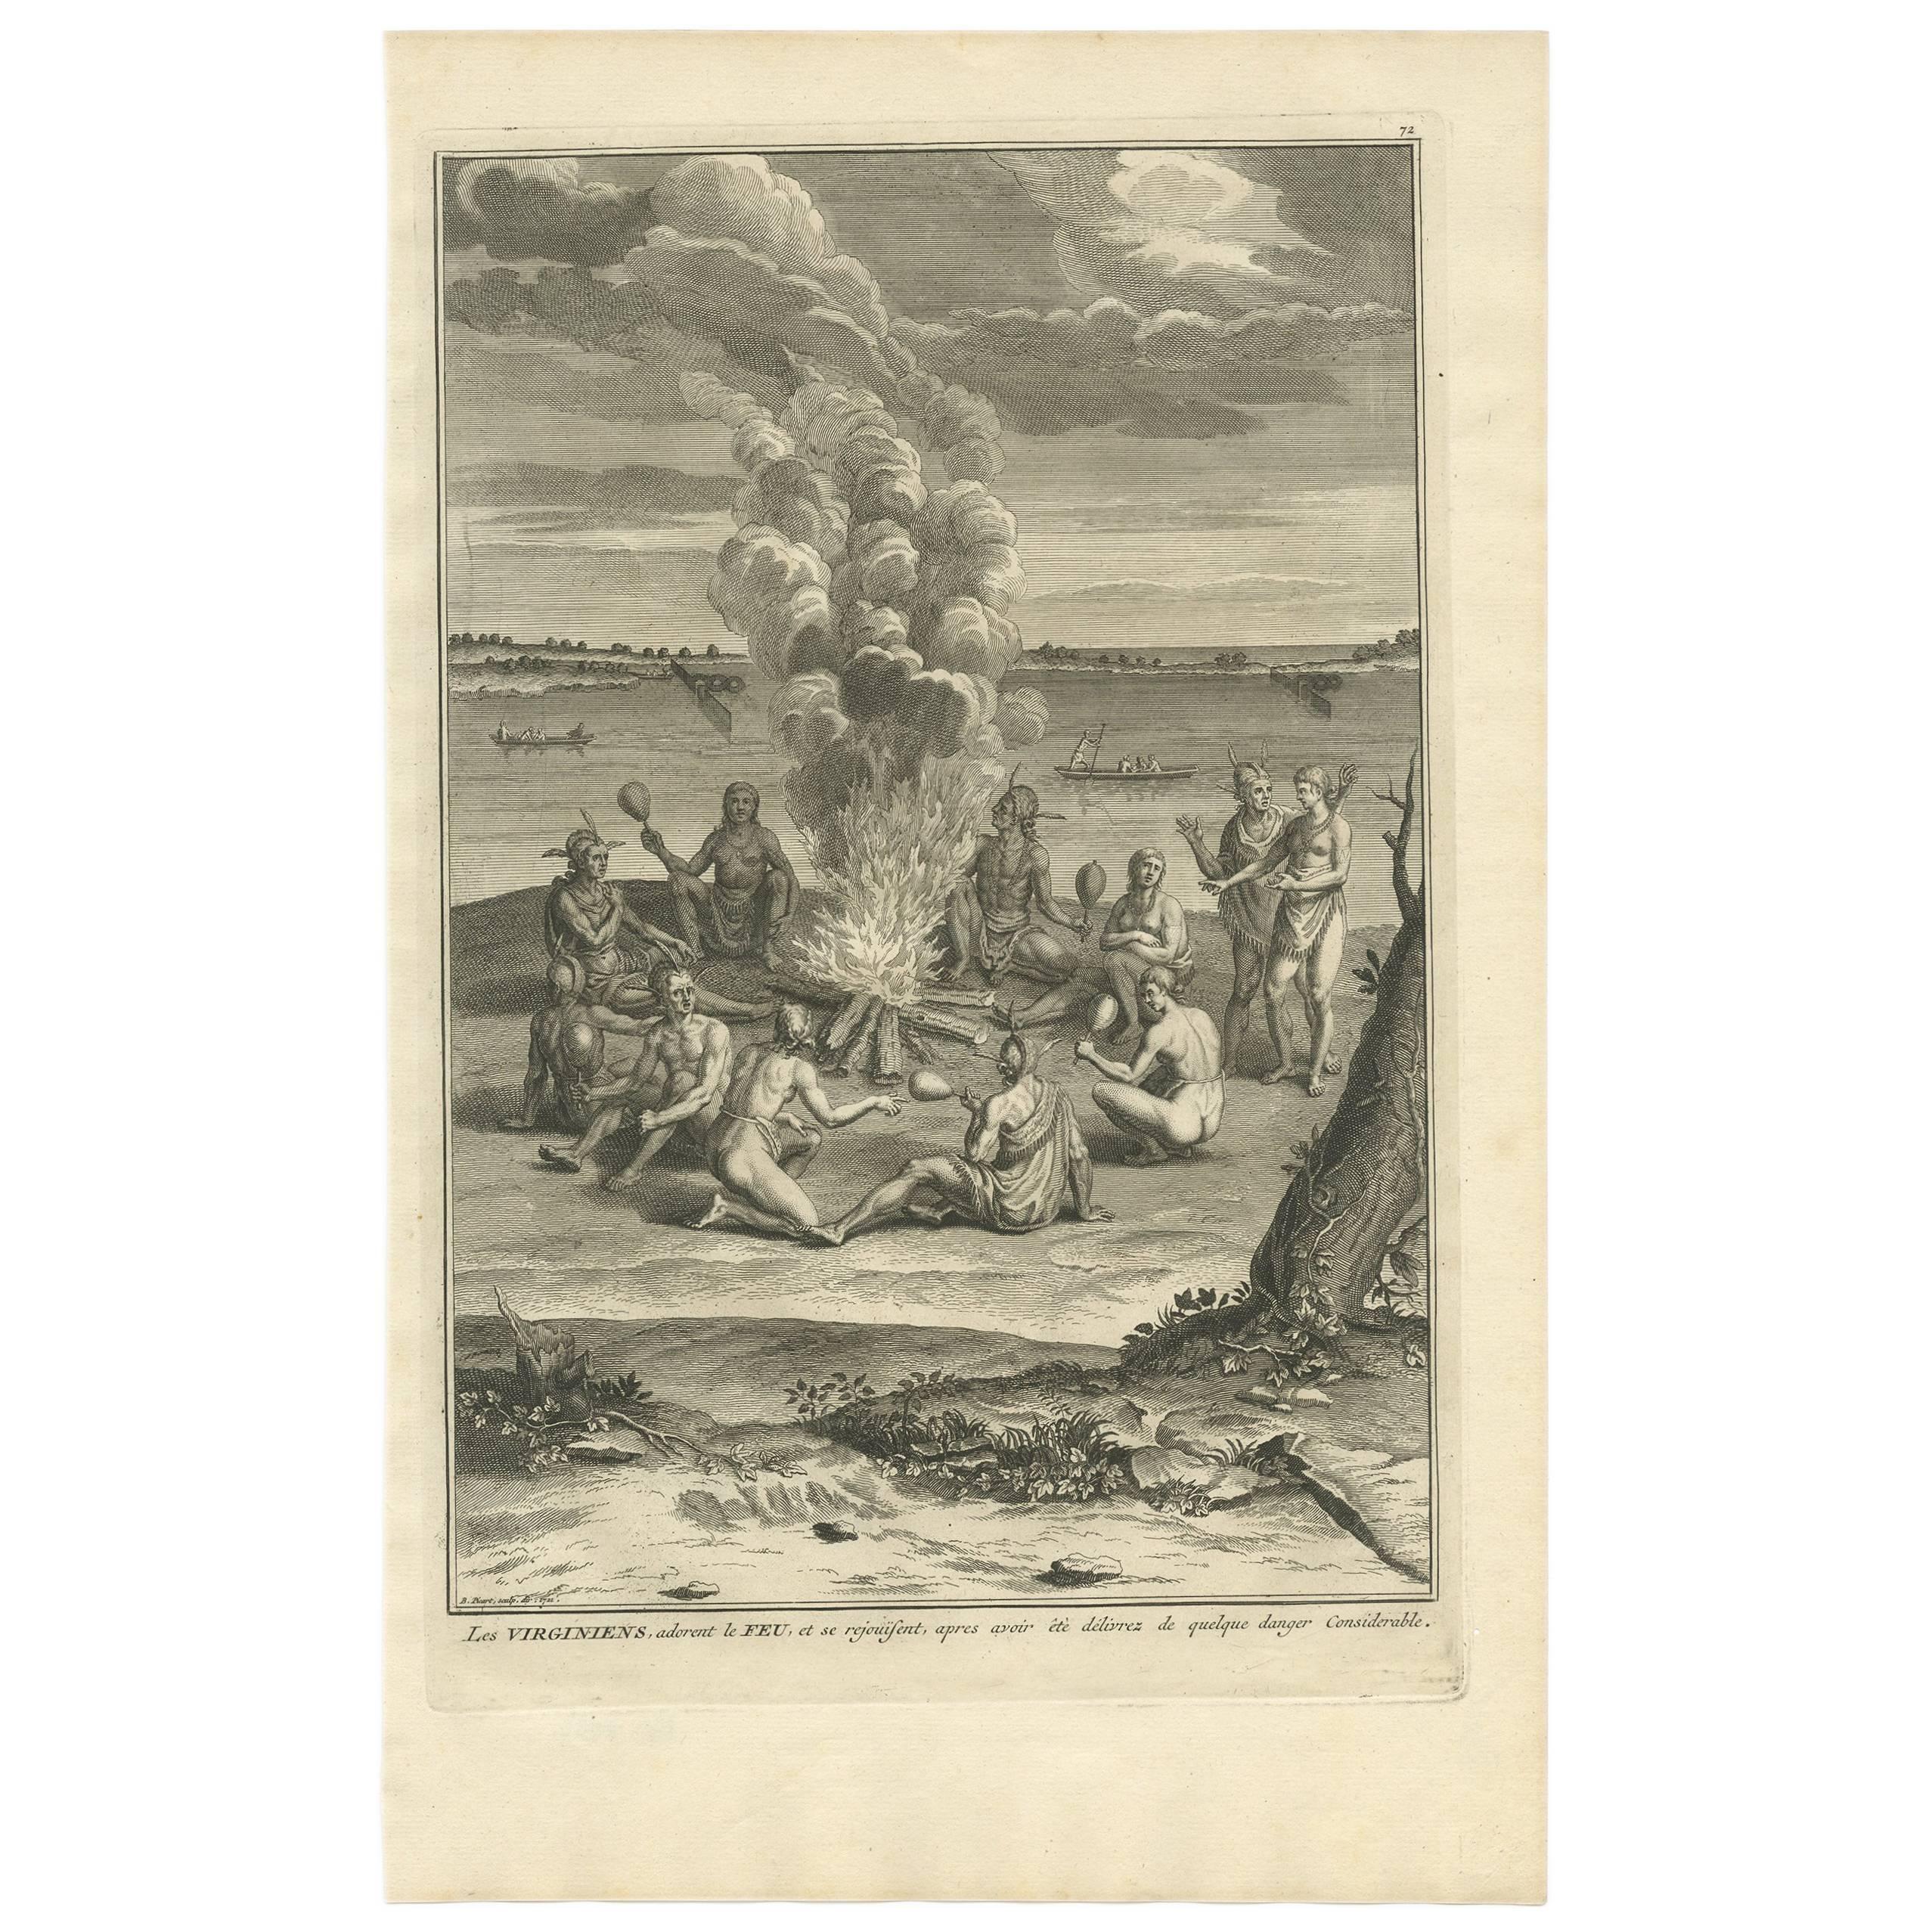 Antique Print of a Gathering Around a Fire in Virginia by B. Picart, 1721